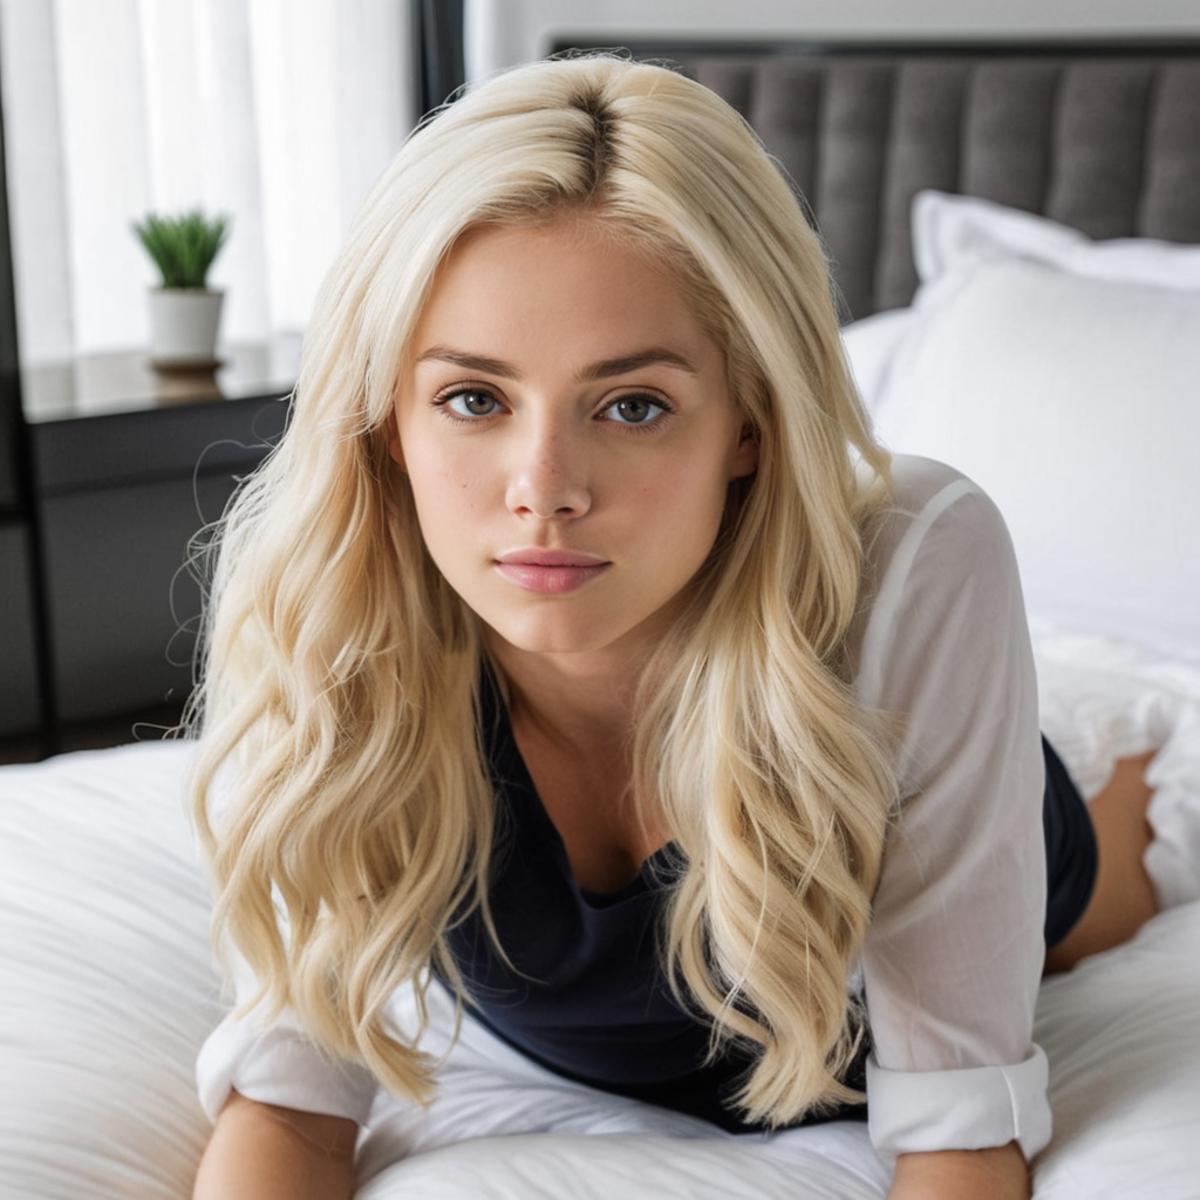 A blonde woman in a white shirt lying on a bed.